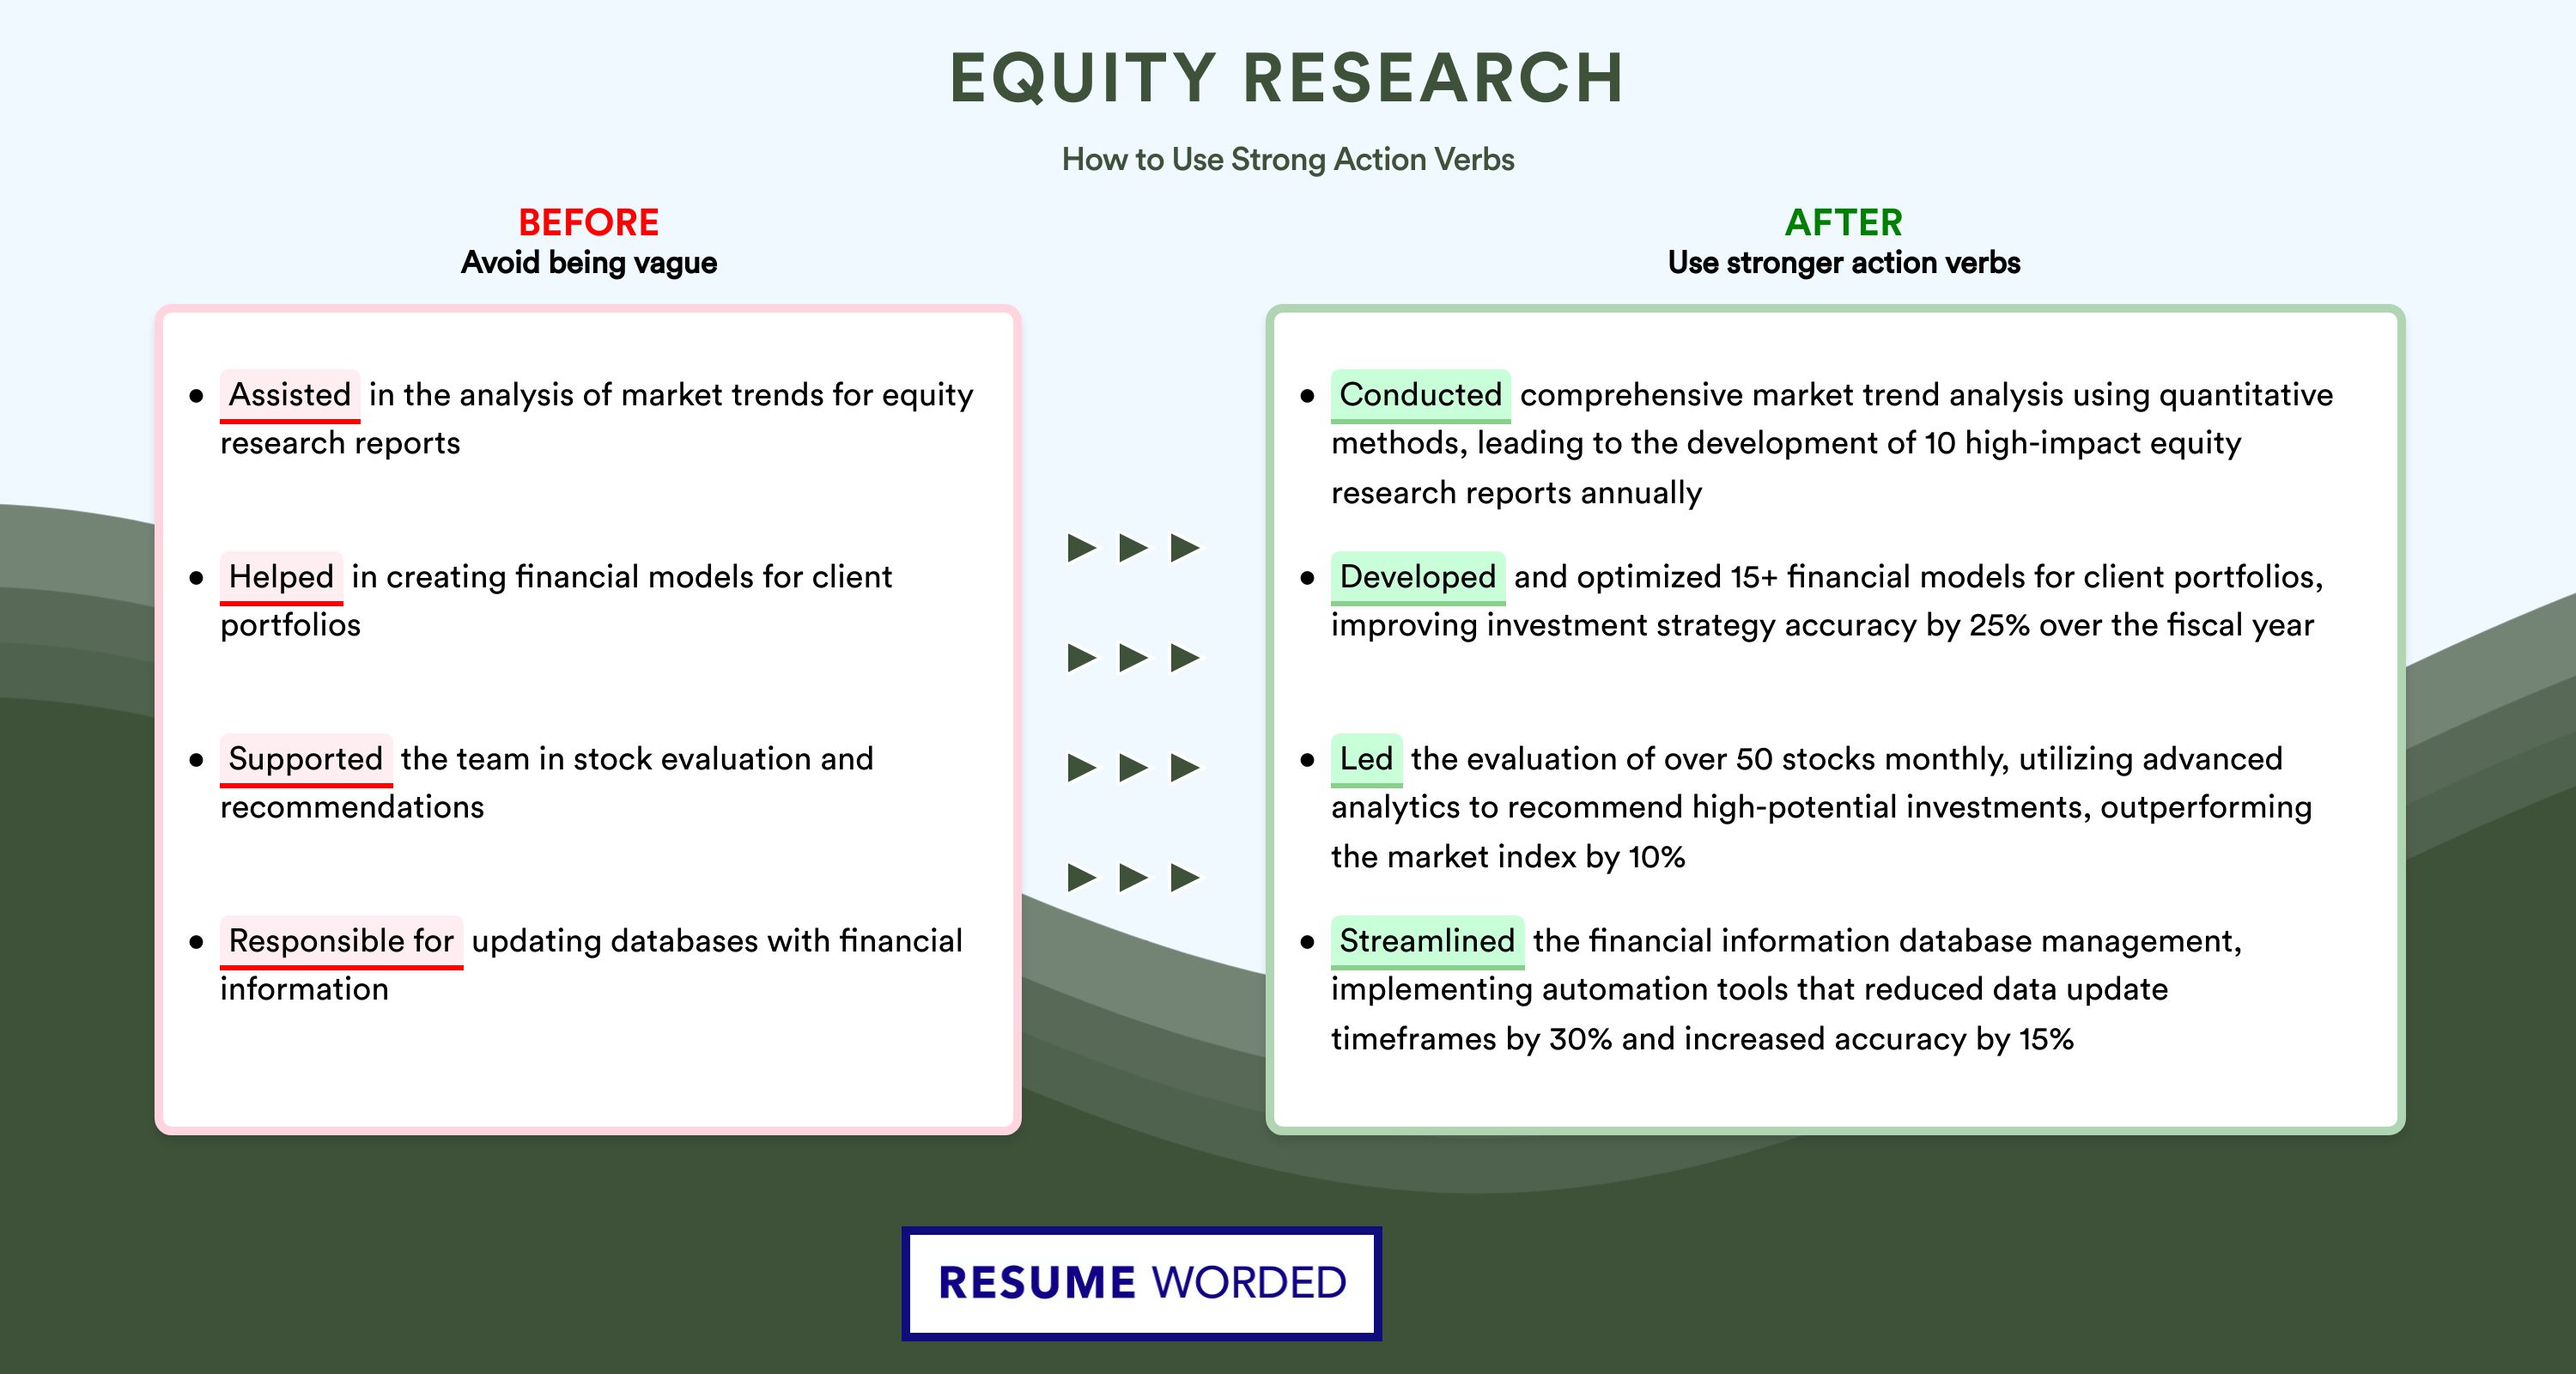 Action Verbs for Equity Research